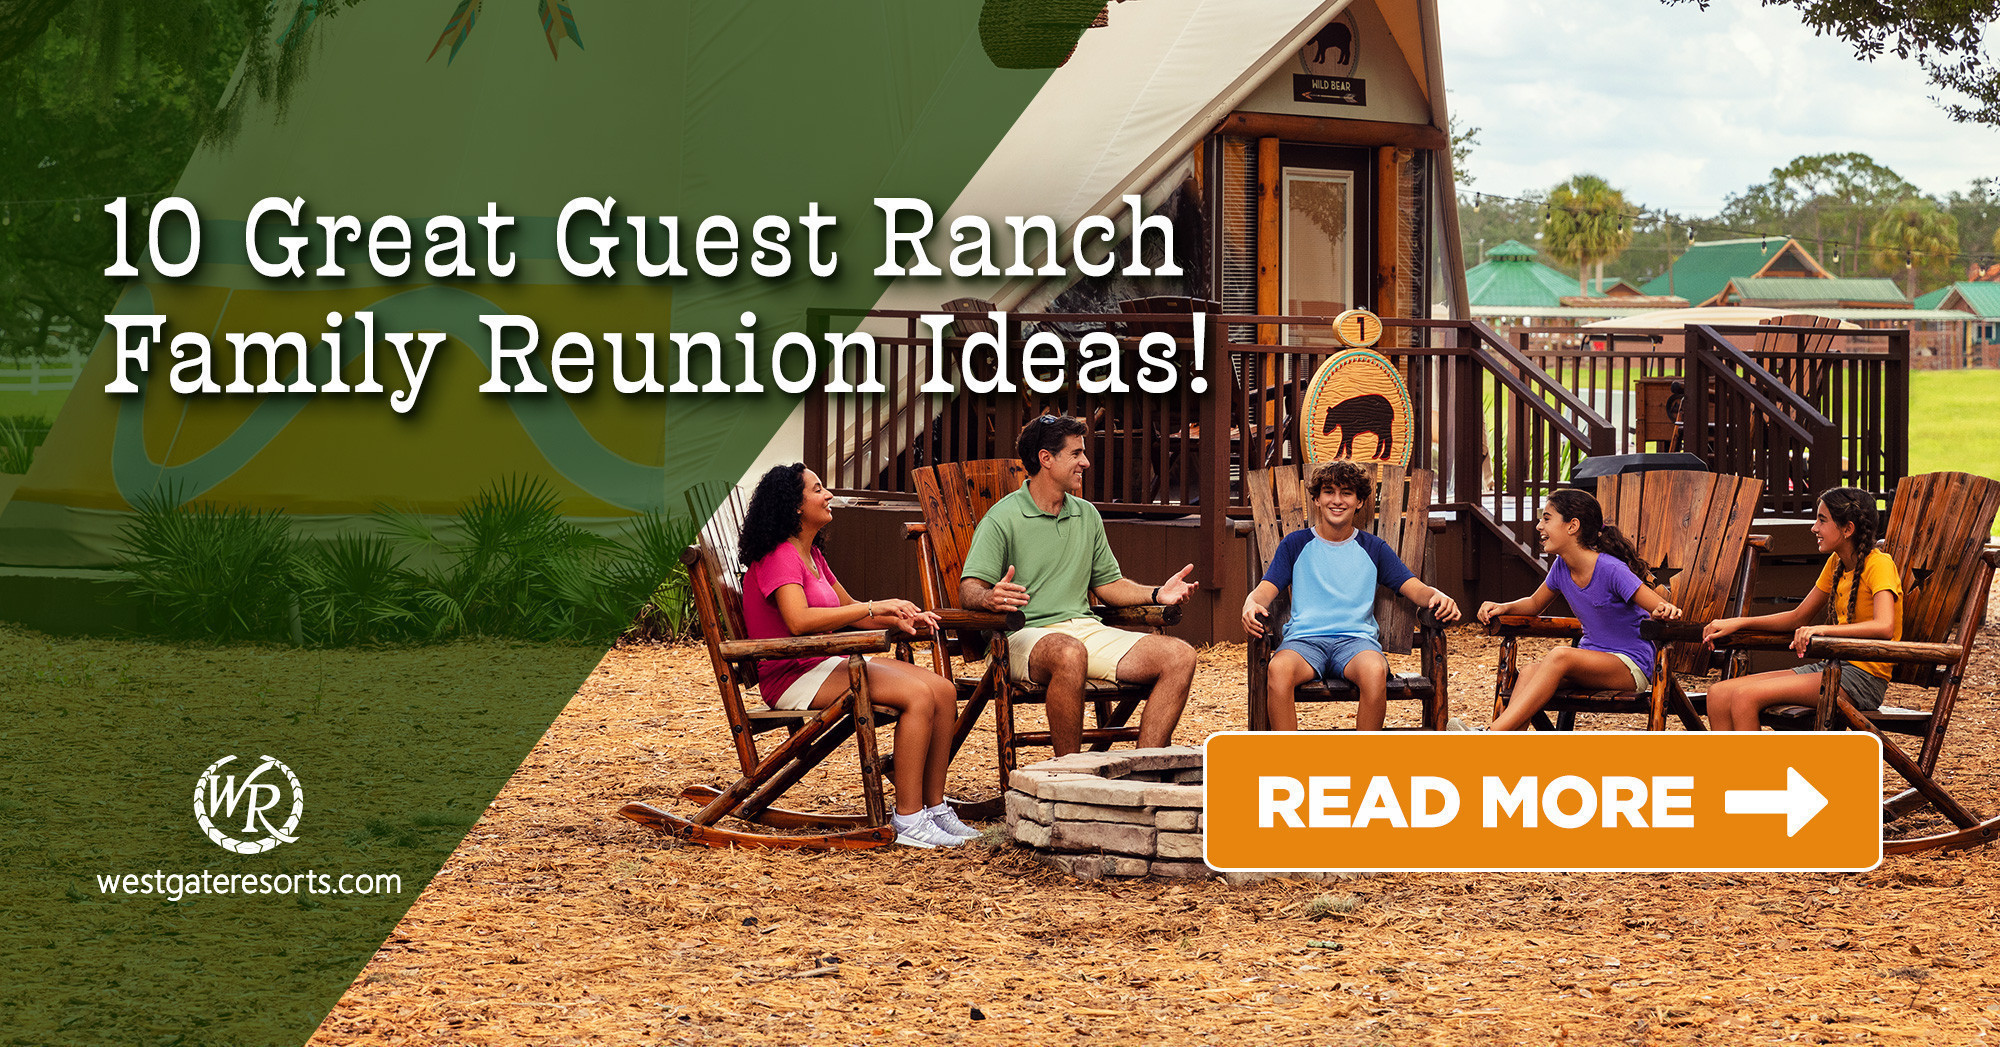 10 Great Guest Ranch Family Reunion Ideas!